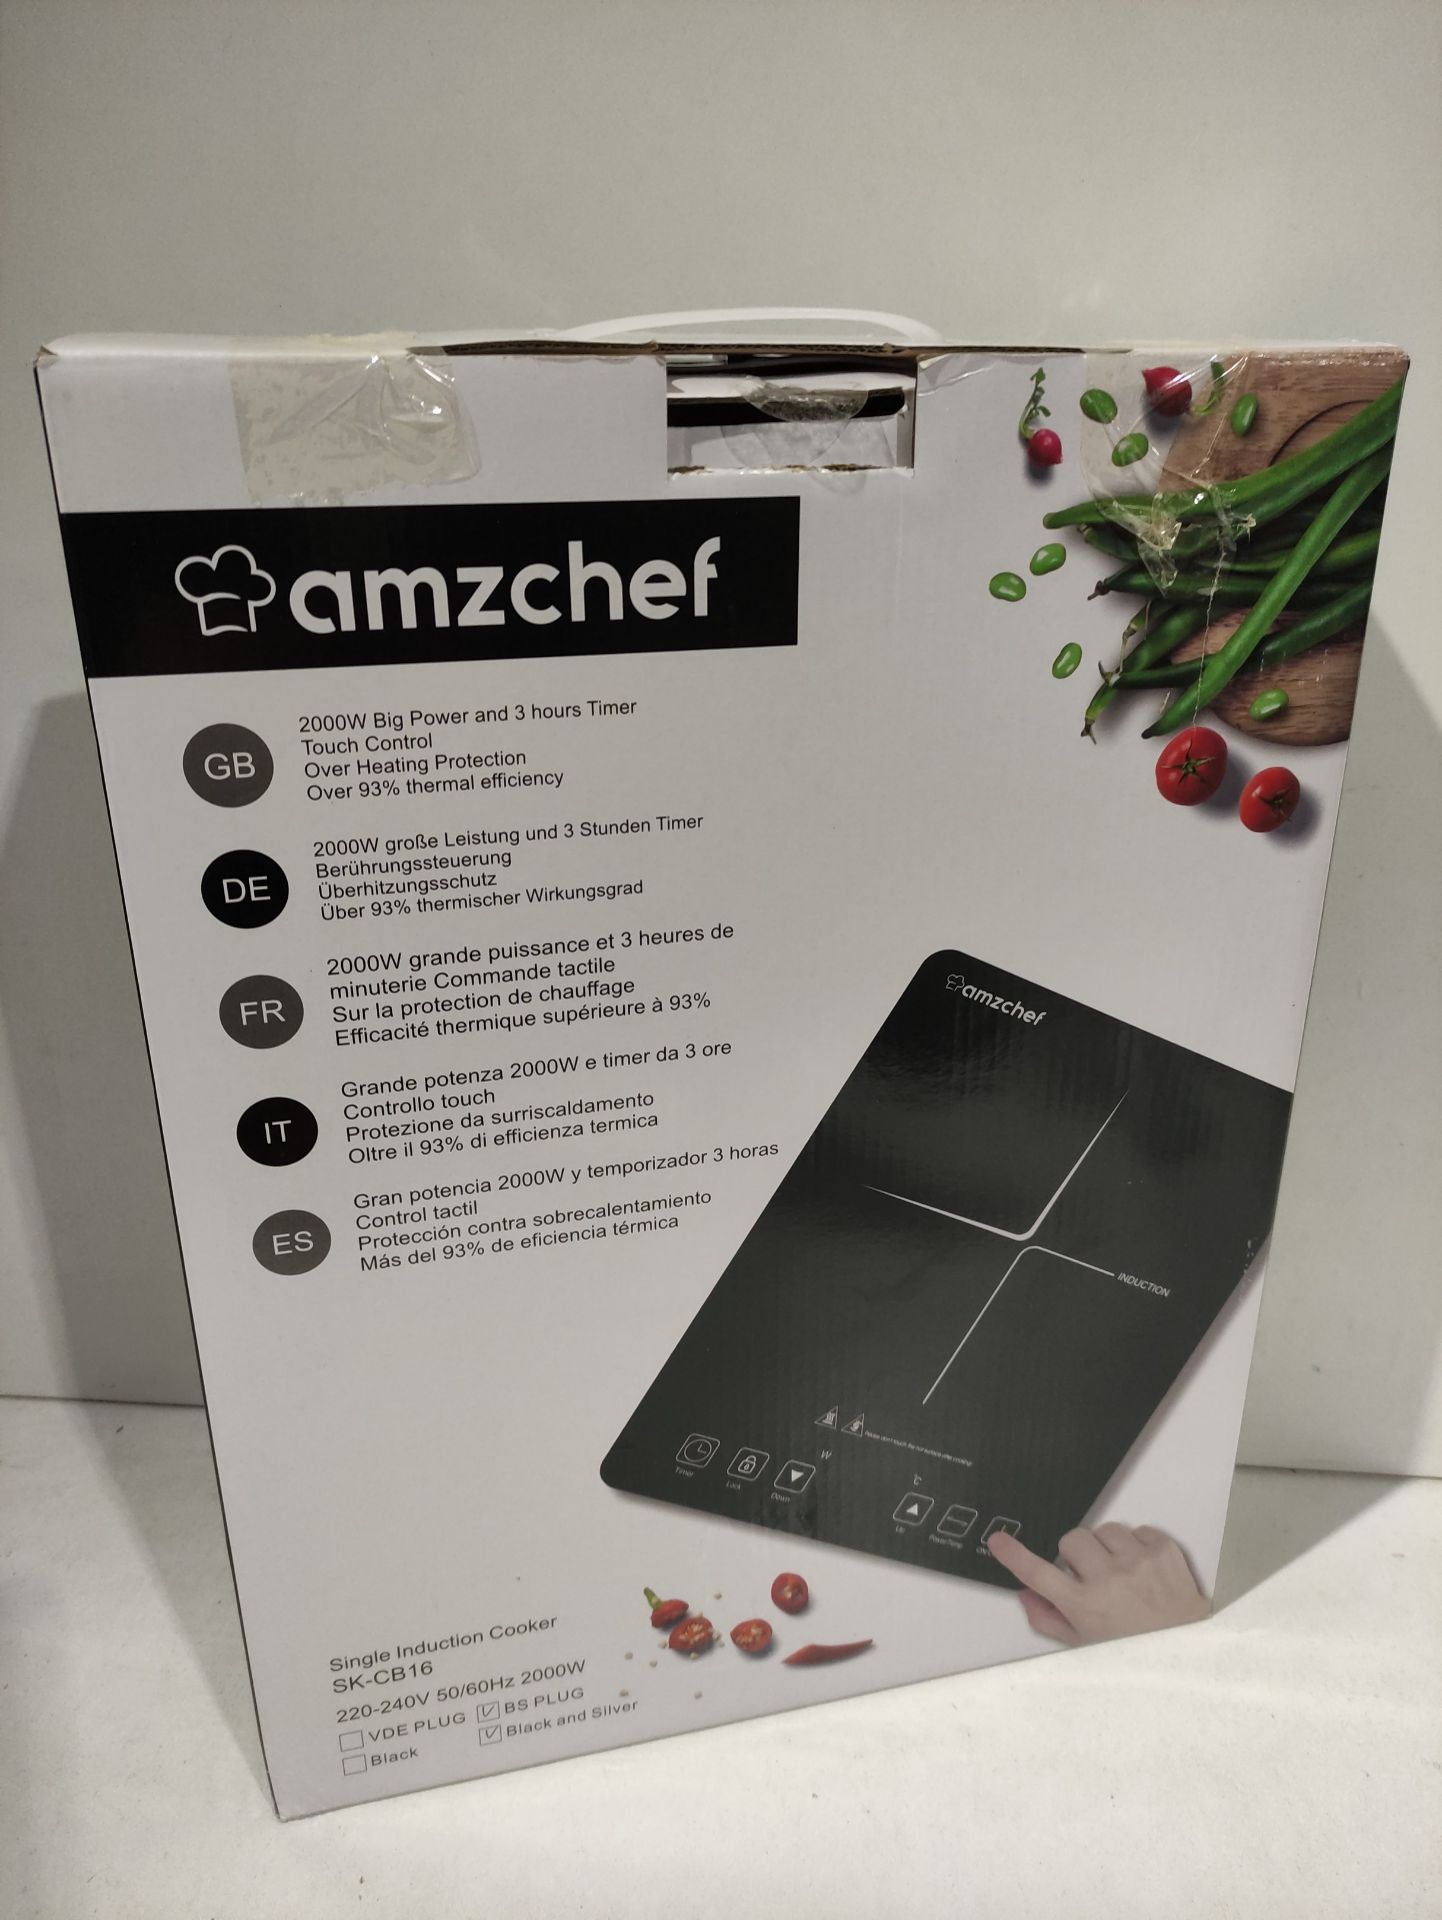 RRP £66.99 AMZCHEF Single Induction Cooker - Image 2 of 2